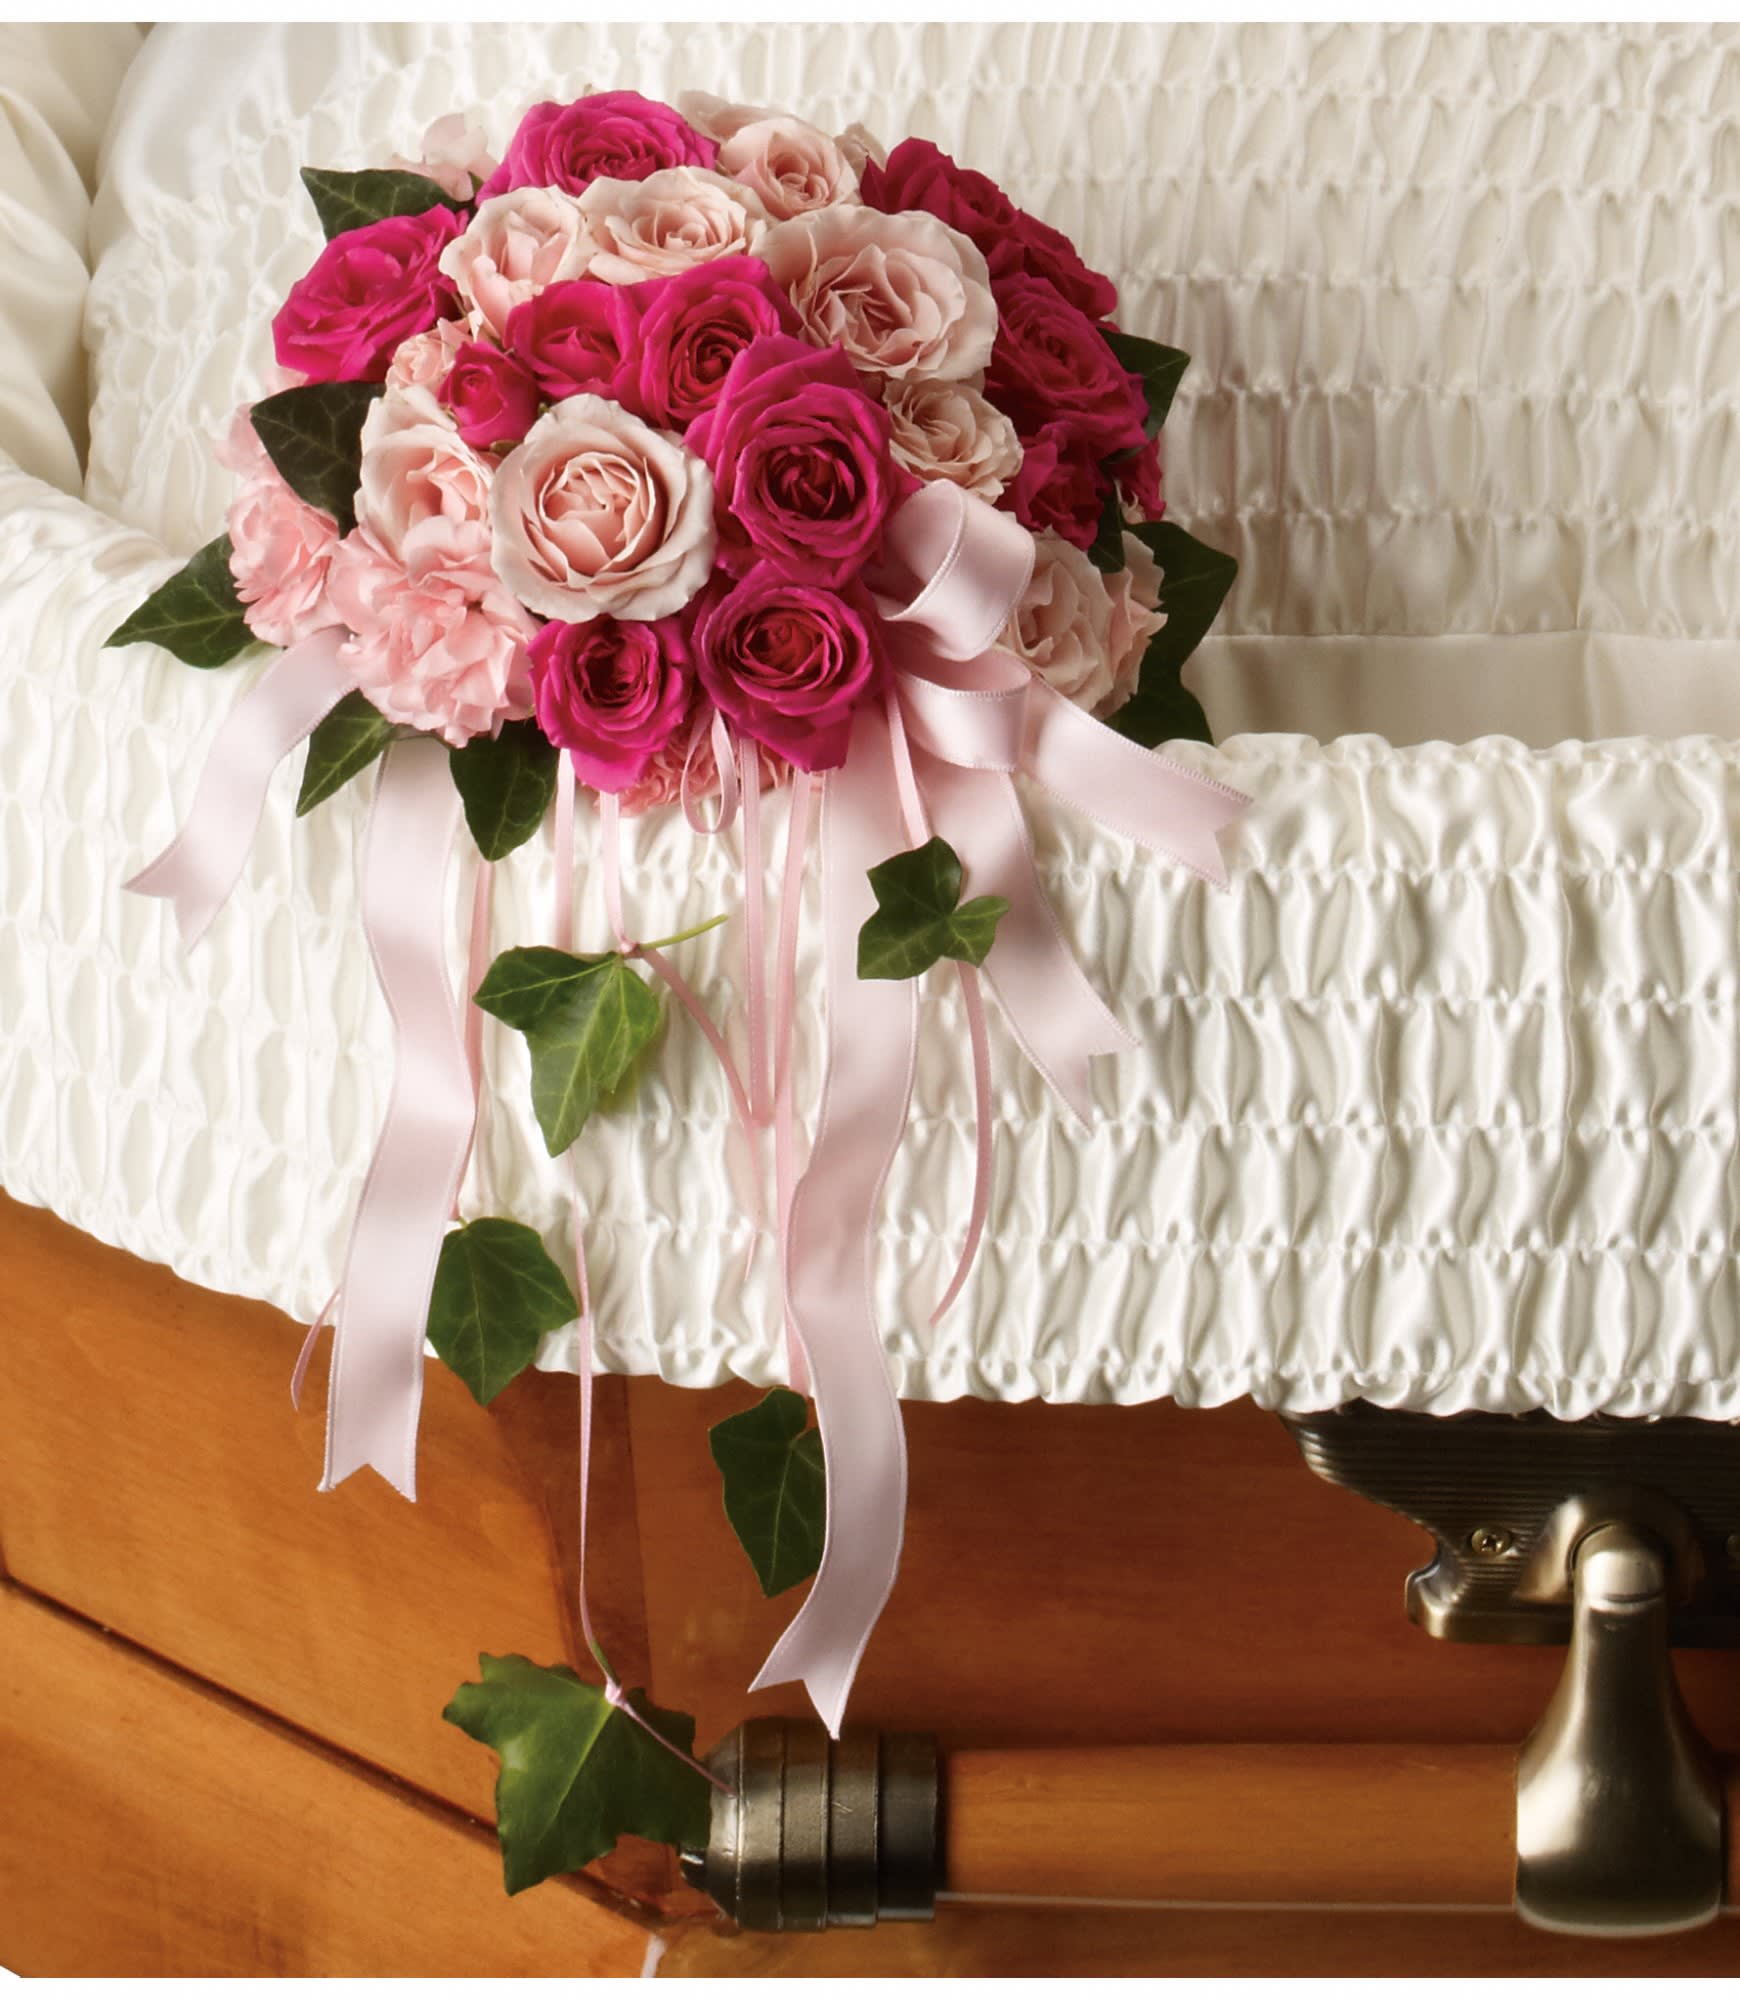 Rose Reflection Casket Insert by Teleflora - A beautiful gesture, this lovely array of pink spray roses and pink carnations inside the casket inspires a feeling of closeness with the lost loved one.  